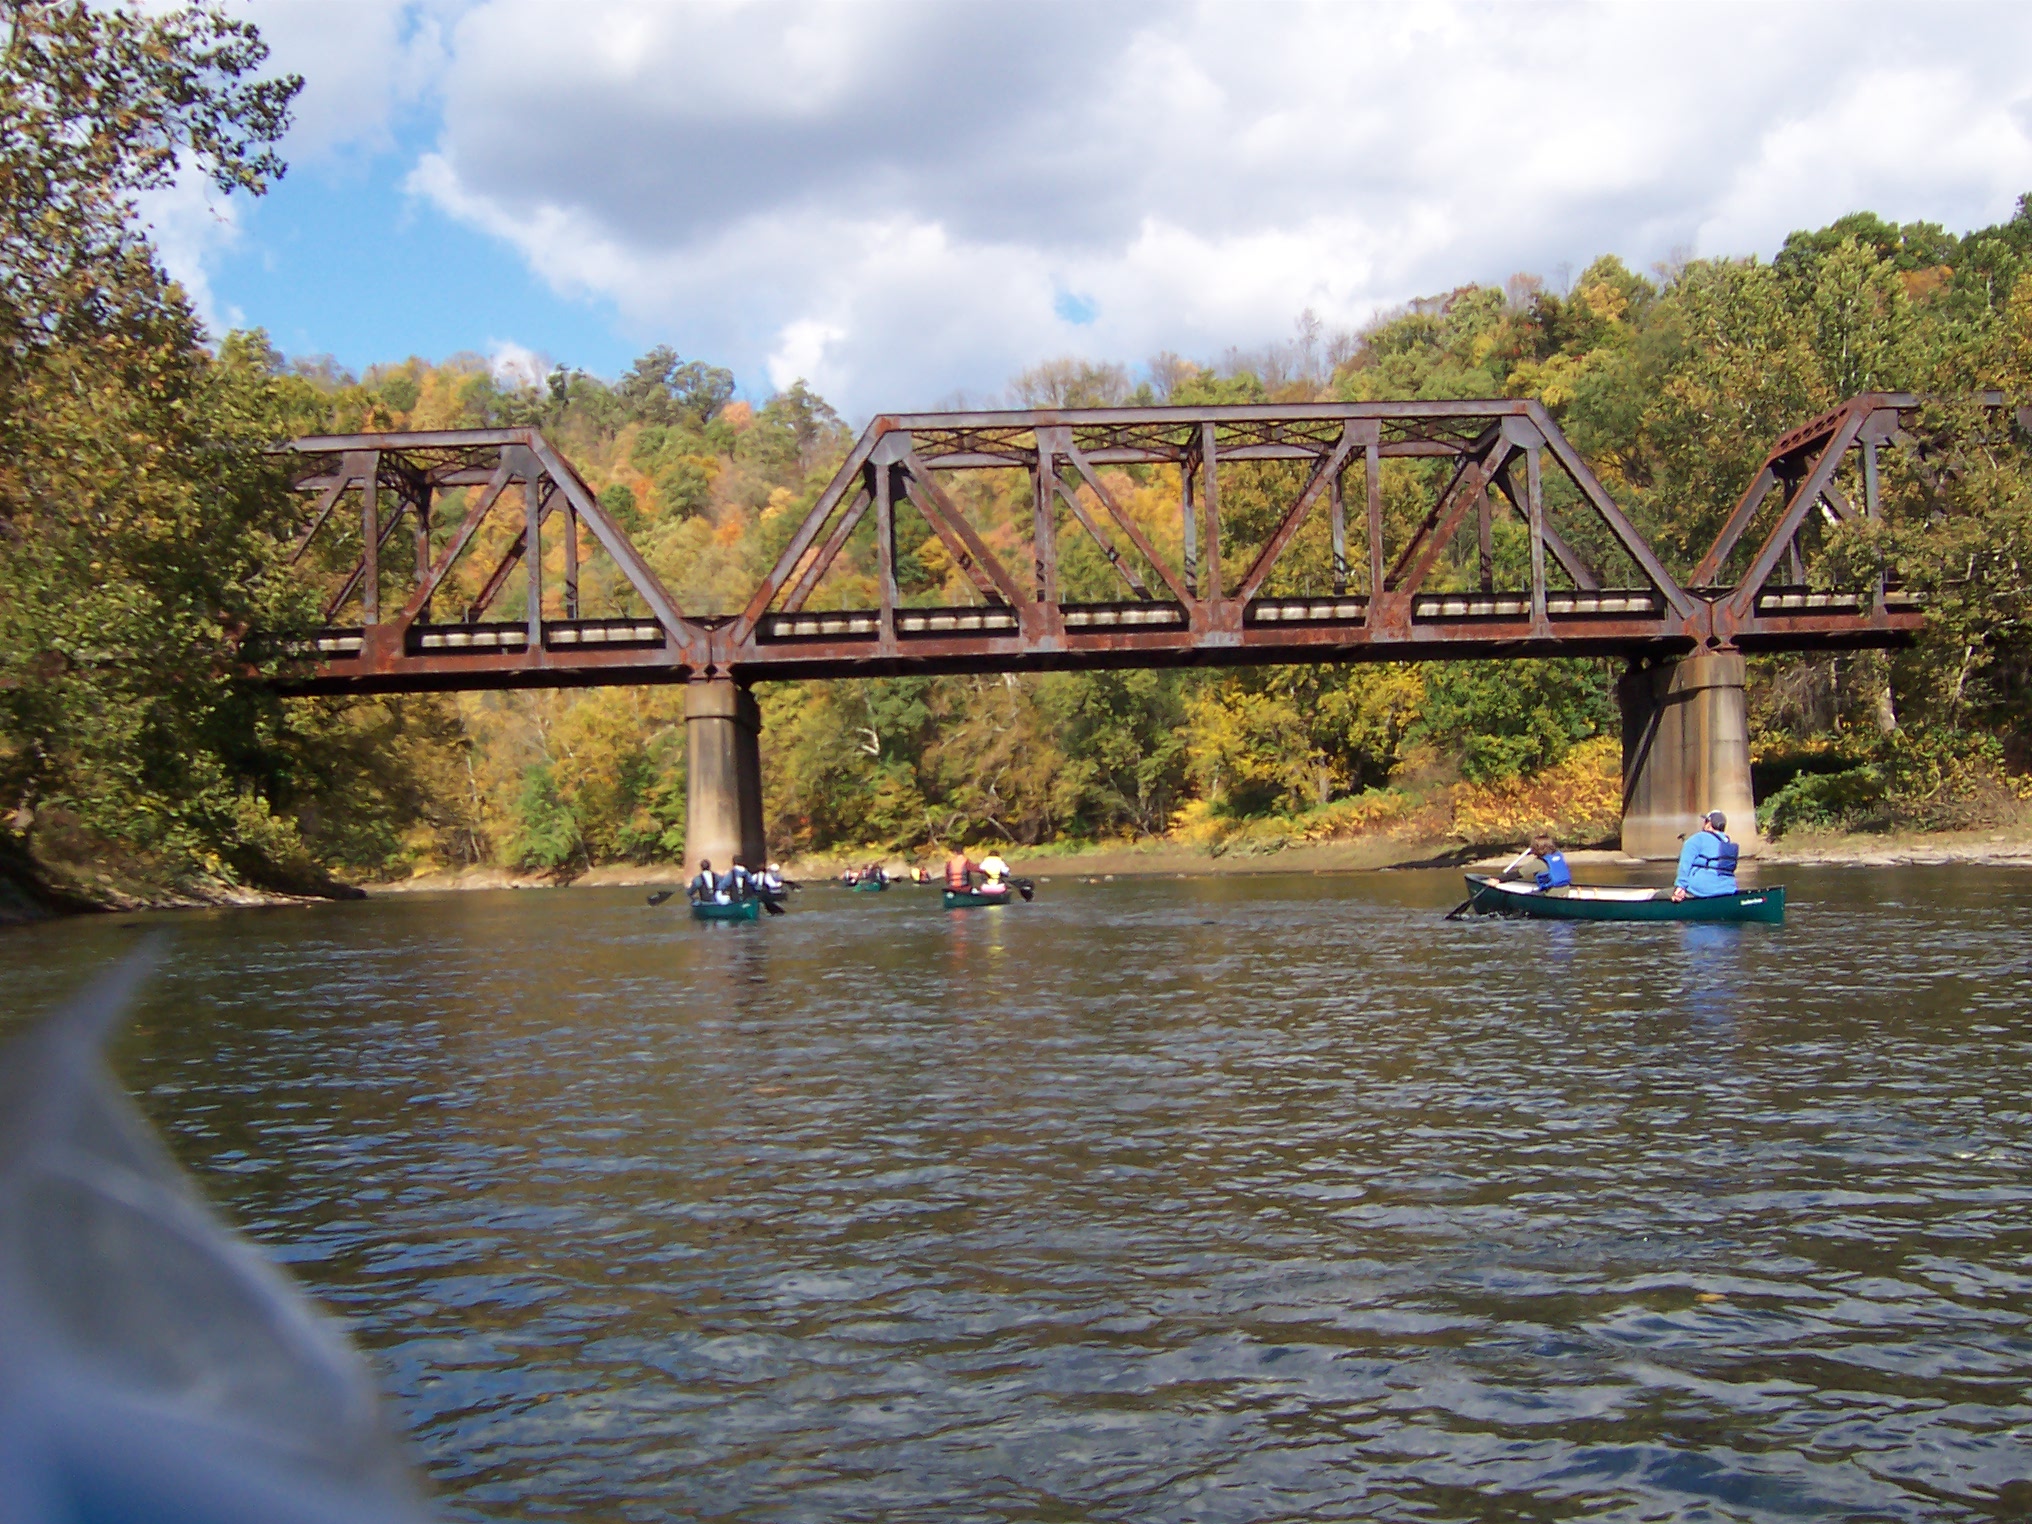 Neill at THE RIVER’s Edge | Canoe and Kayak and Much More!